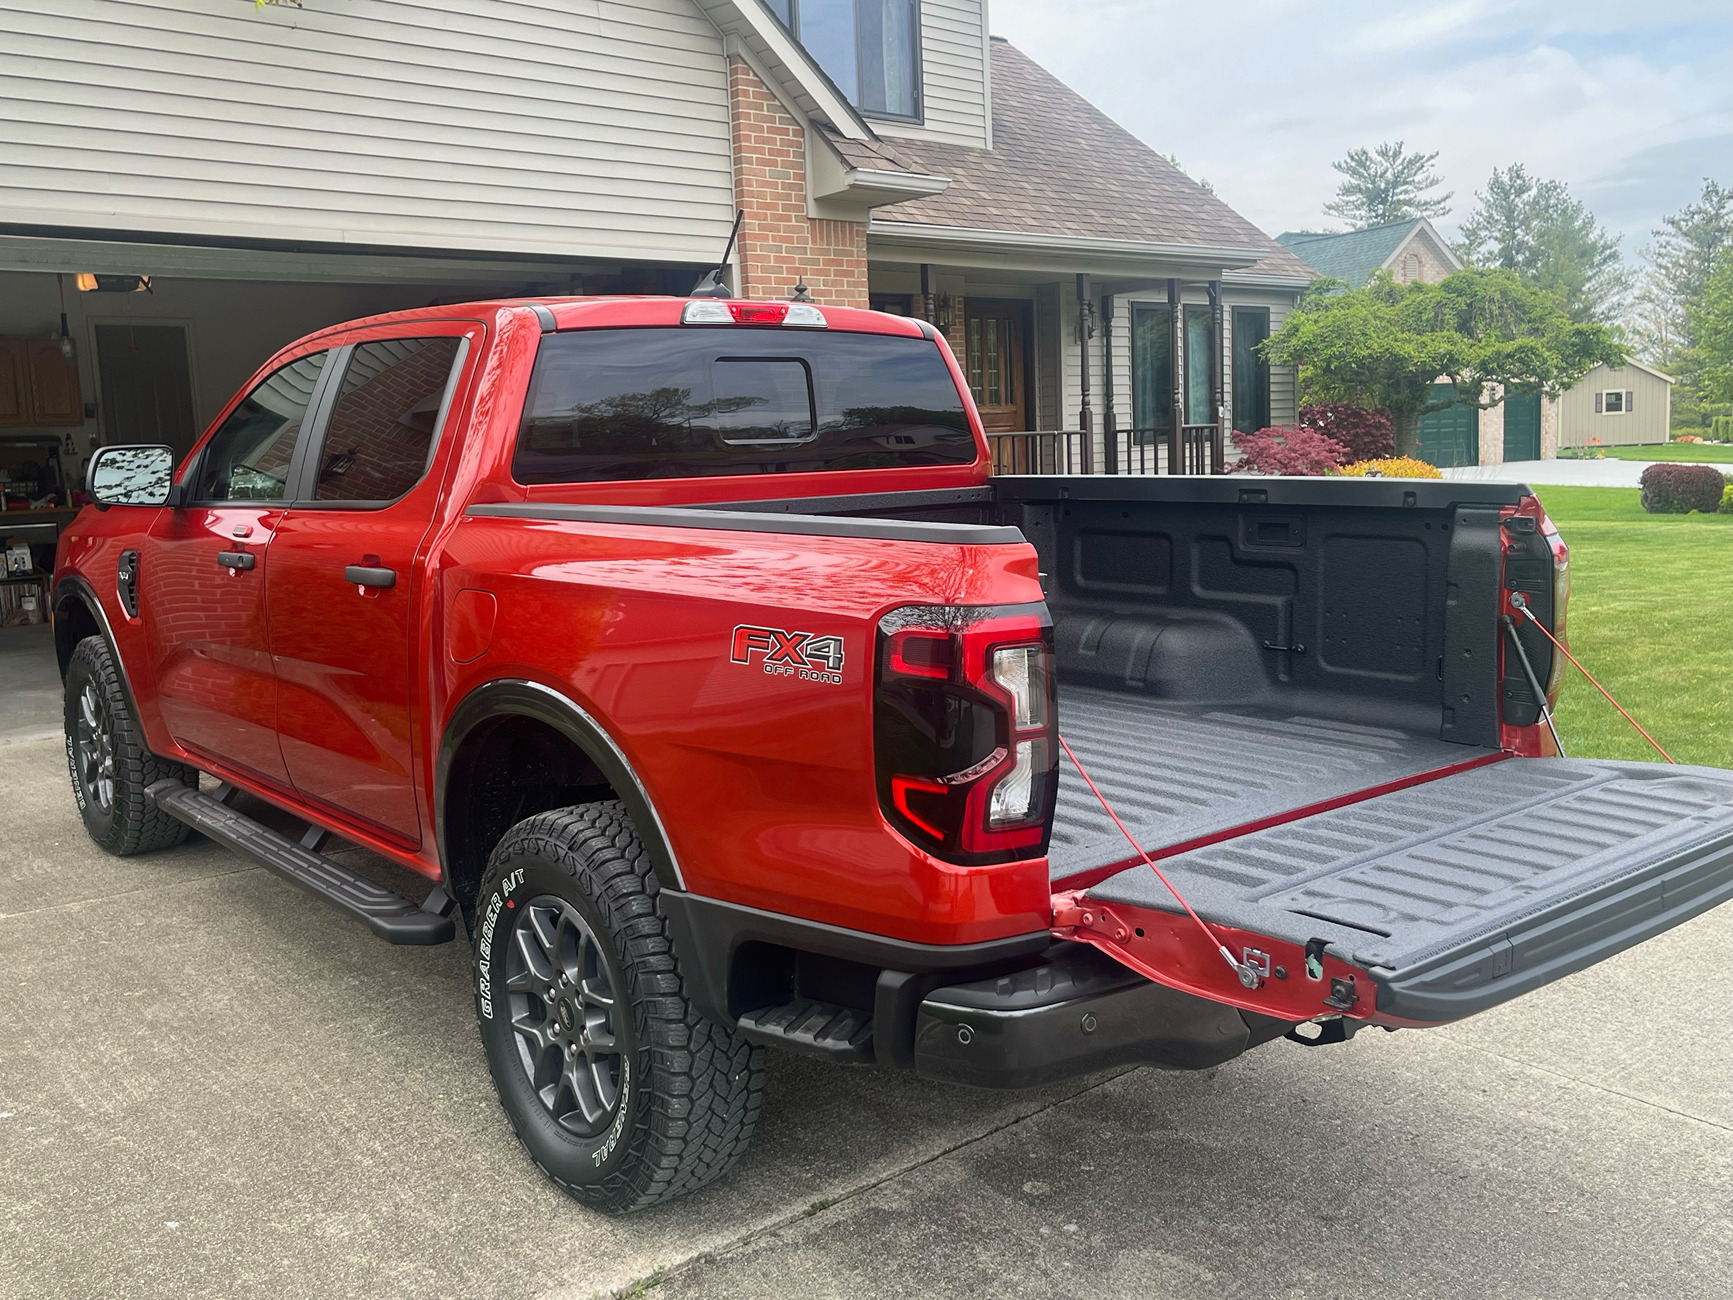 Ford Ranger What did you DO TO your 6G Ranger today? 🧰 🛠️ ⚙️ 🧽 image0